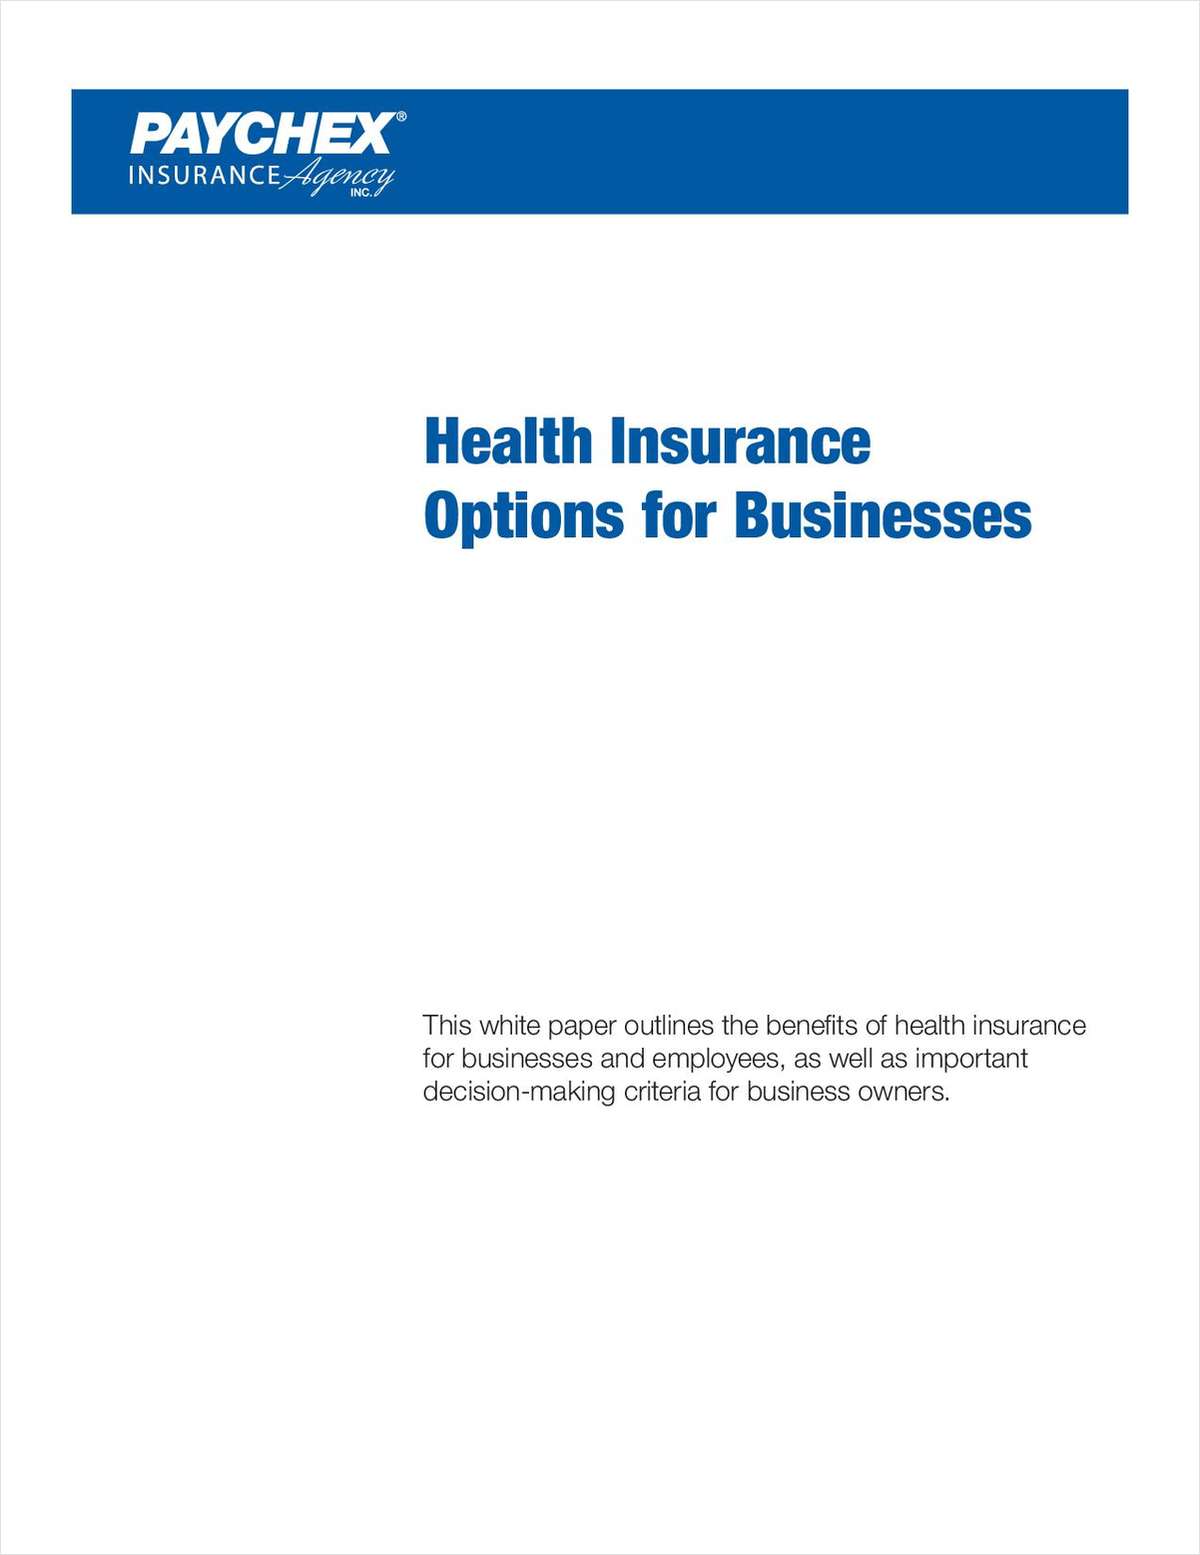 Health Insurance Options for Businesses